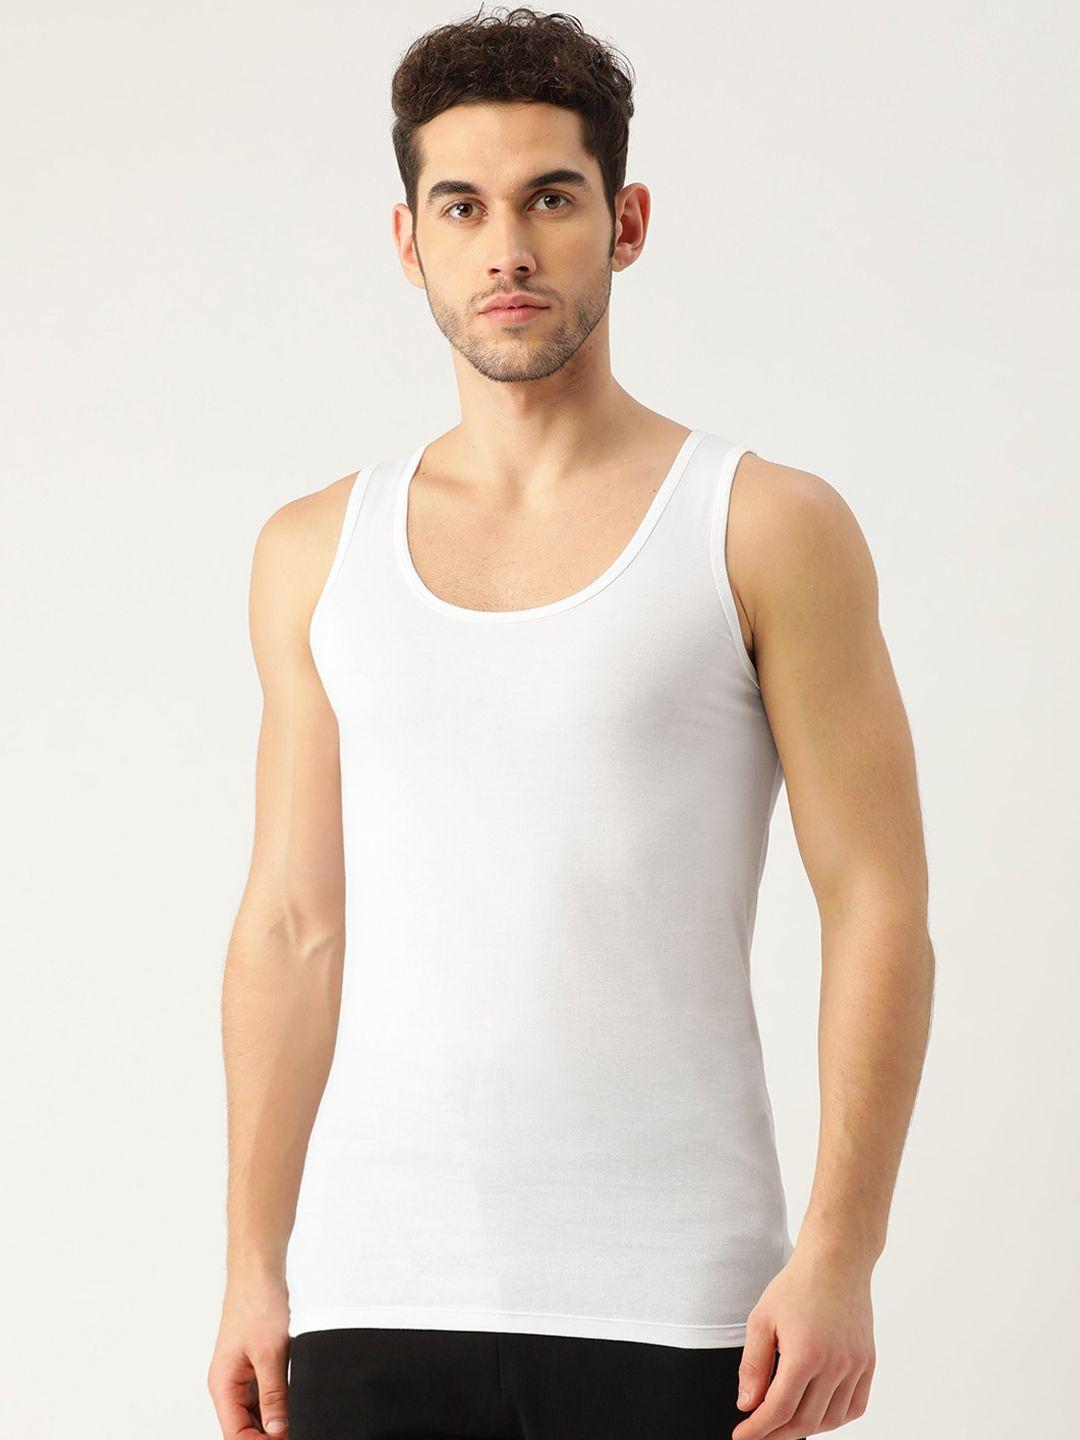 the roadster lifestyle co. white pure cotton sleeveless innerwear vests